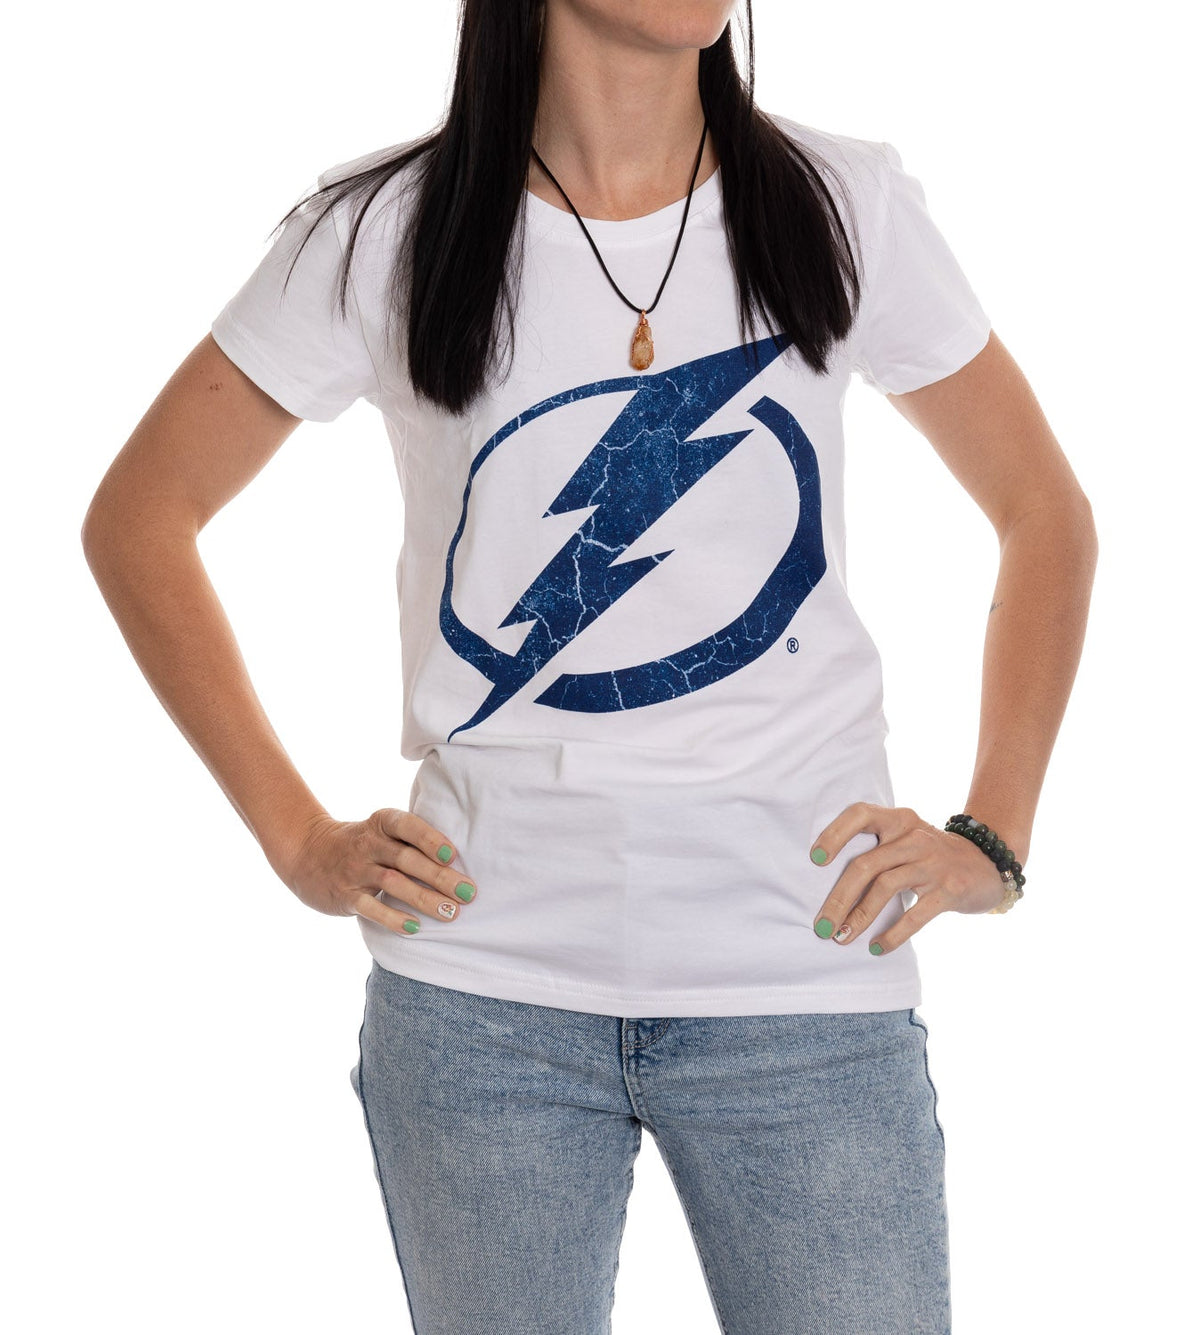 Tampa Bay Lightning Women's Distressed Print Fitted Crew Neck Premium T-Shirt - White